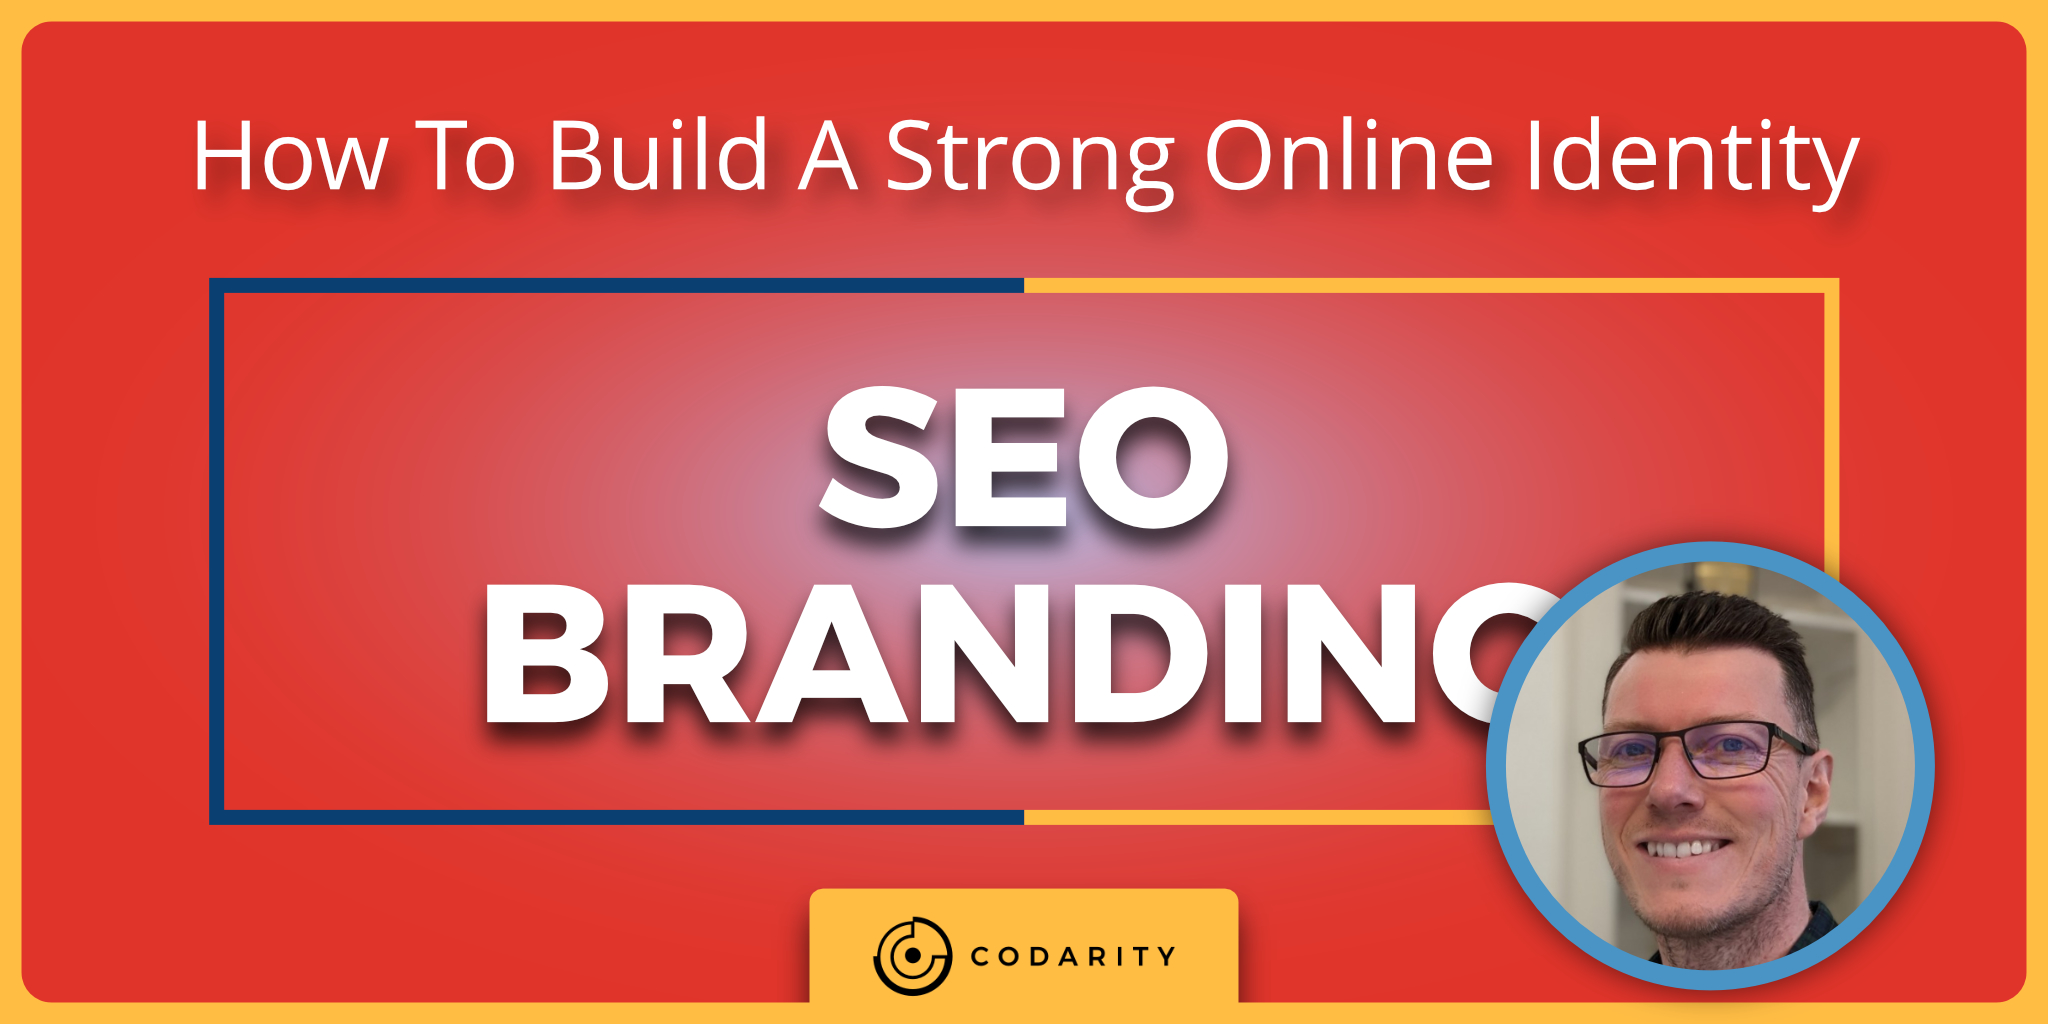 Featured image for “SEO Branding 101: How To Build A Strong Online Identity For Your Business”